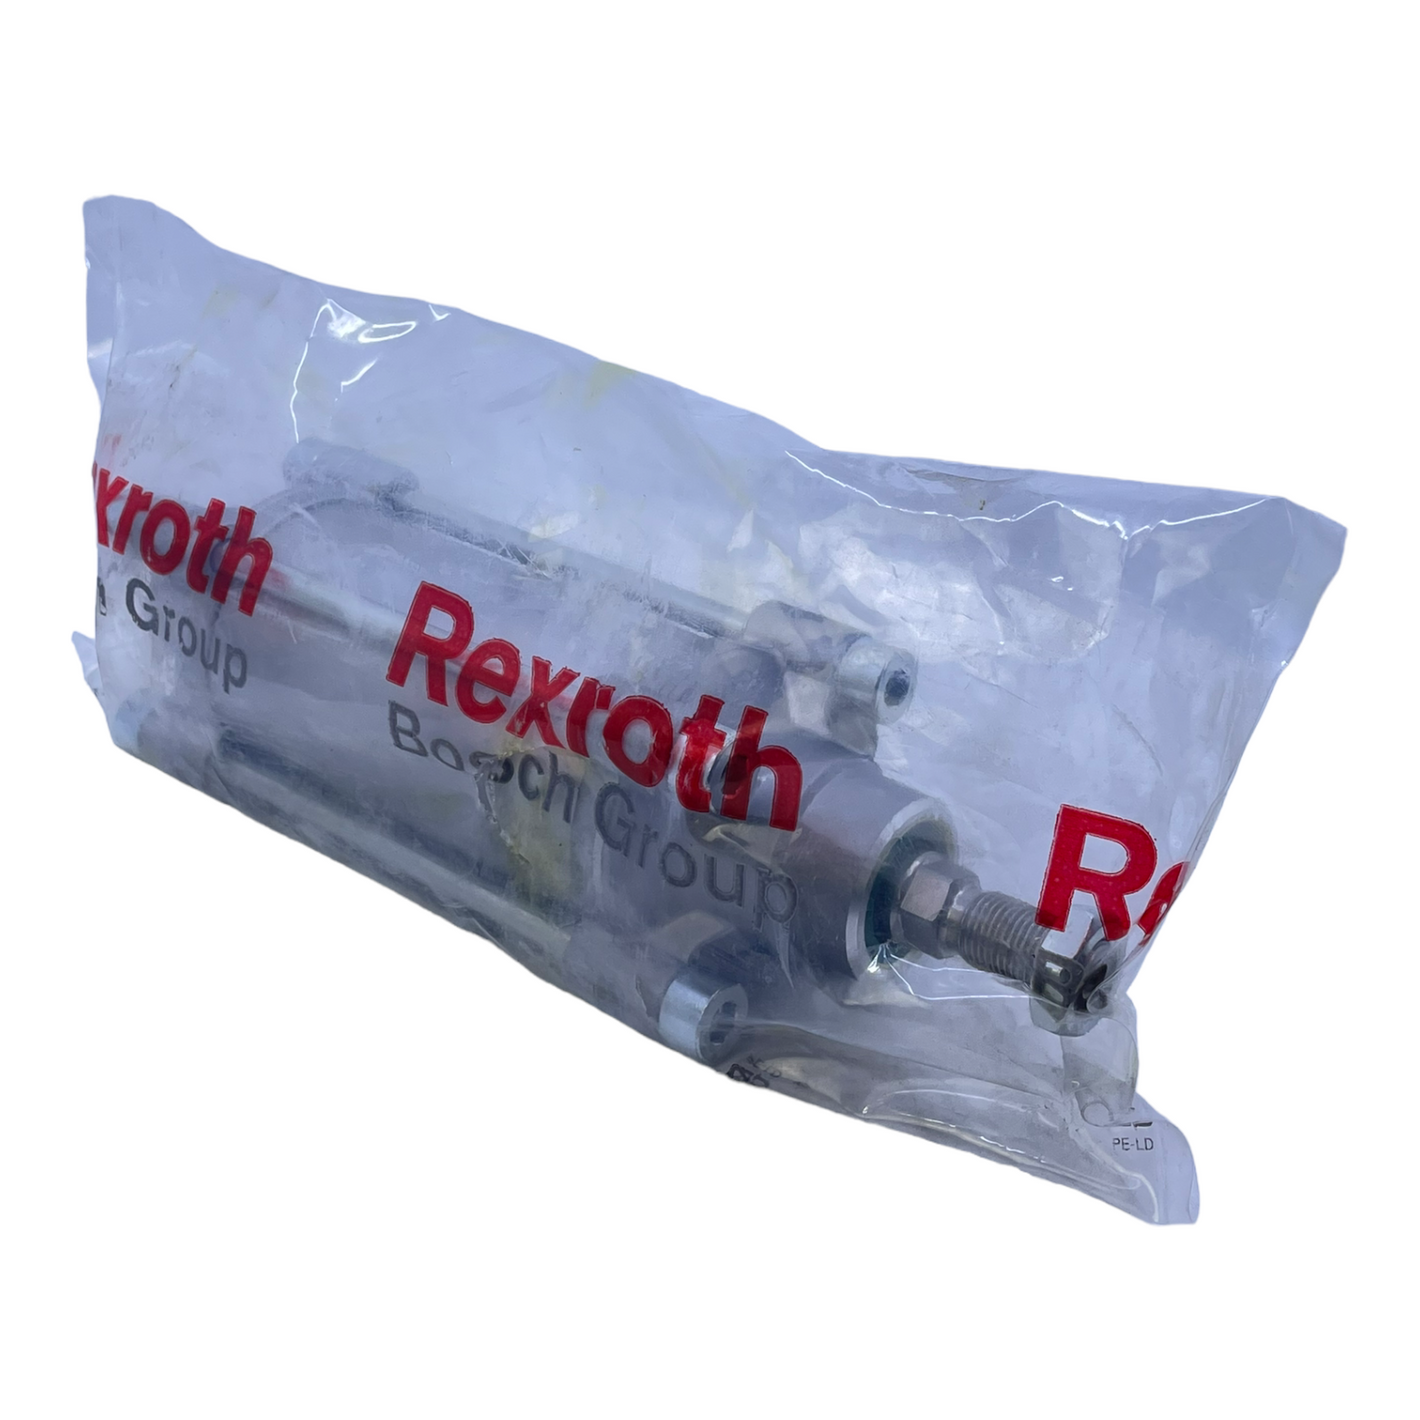 Rexroth 0 822 343 003 Pneumatic cylinder for industrial applications 10Bar